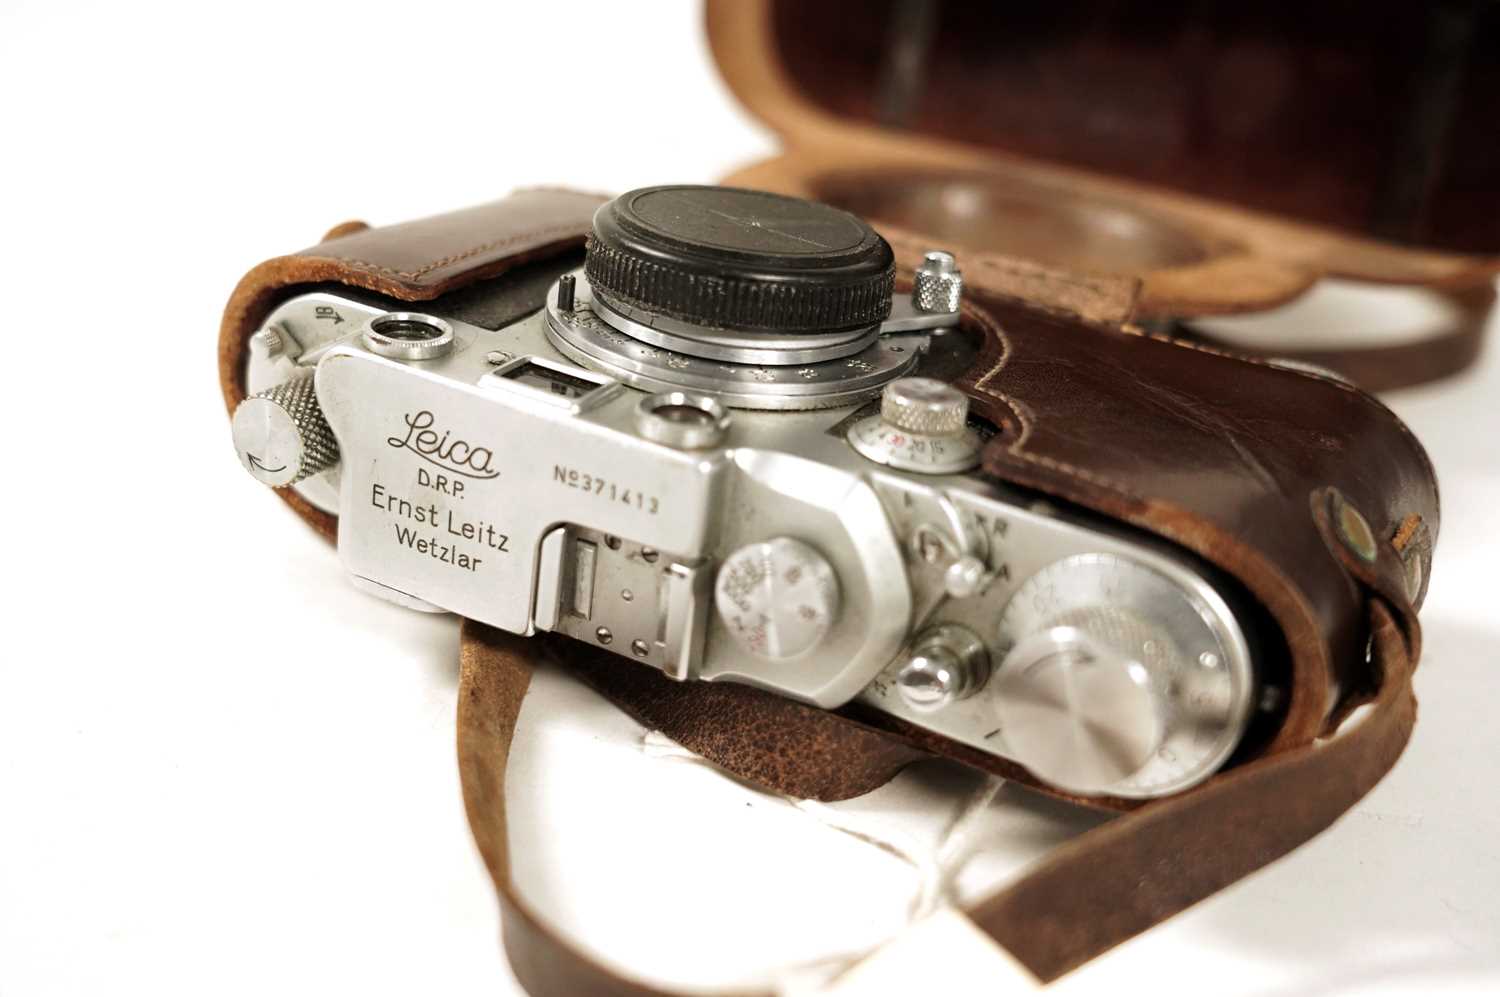 A Leica IIIc rangefinder camera, and other Leica/Leitz accessories - Image 4 of 6